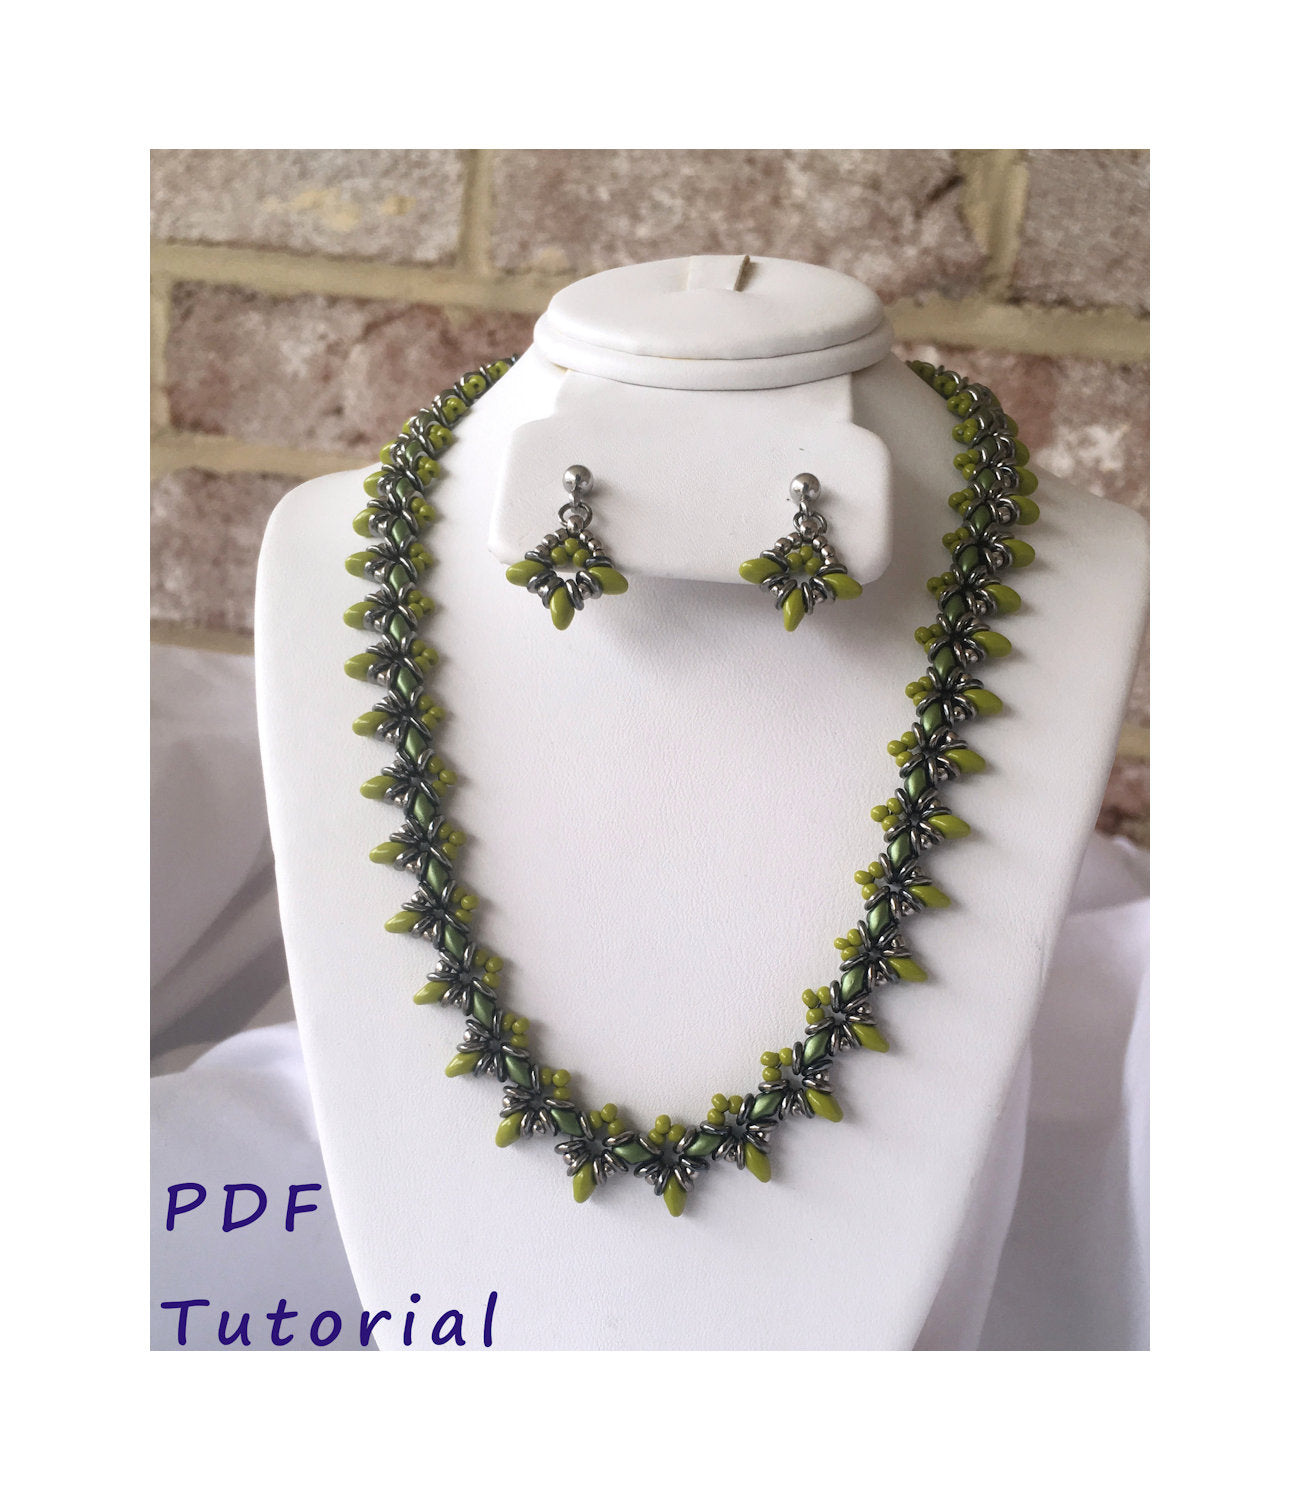 TriStar Necklace and Earrings Set PDF Tutorial/Pattern/Instructions